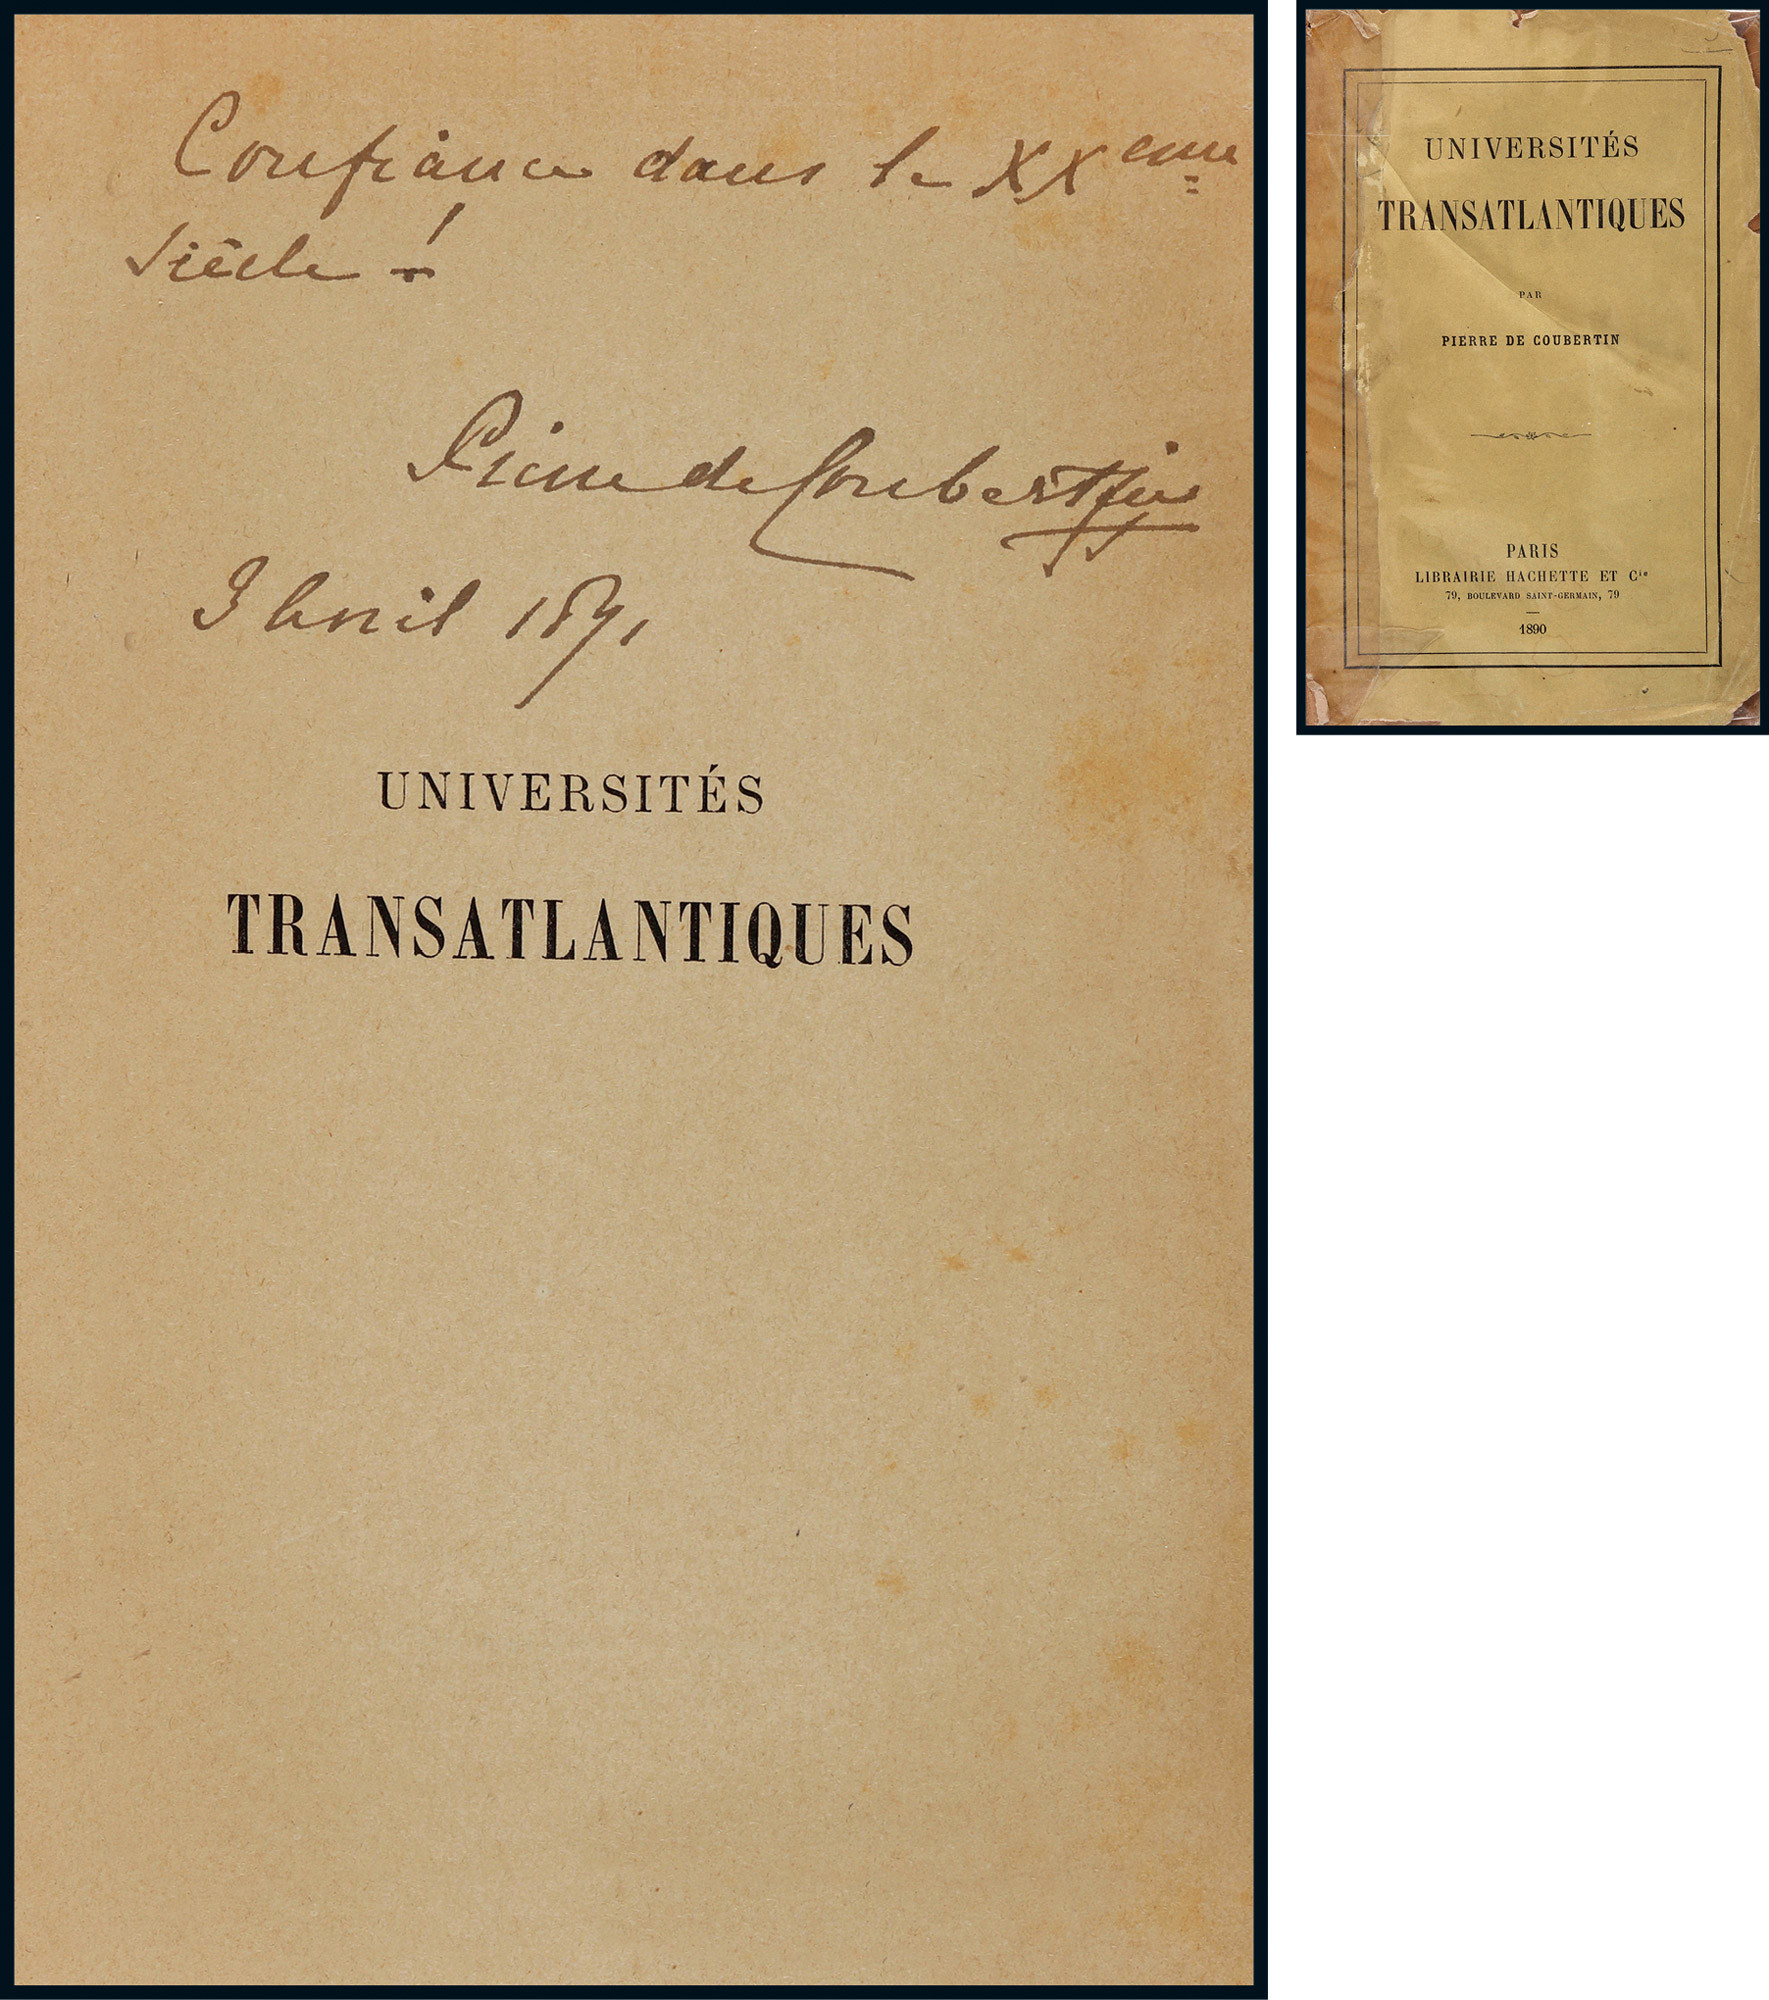 The autographed copy “The University Across the Atlantic” by Pierre De Coubertin, “the father of the Olympics and founder of the modern Olympic movement”, with certificate